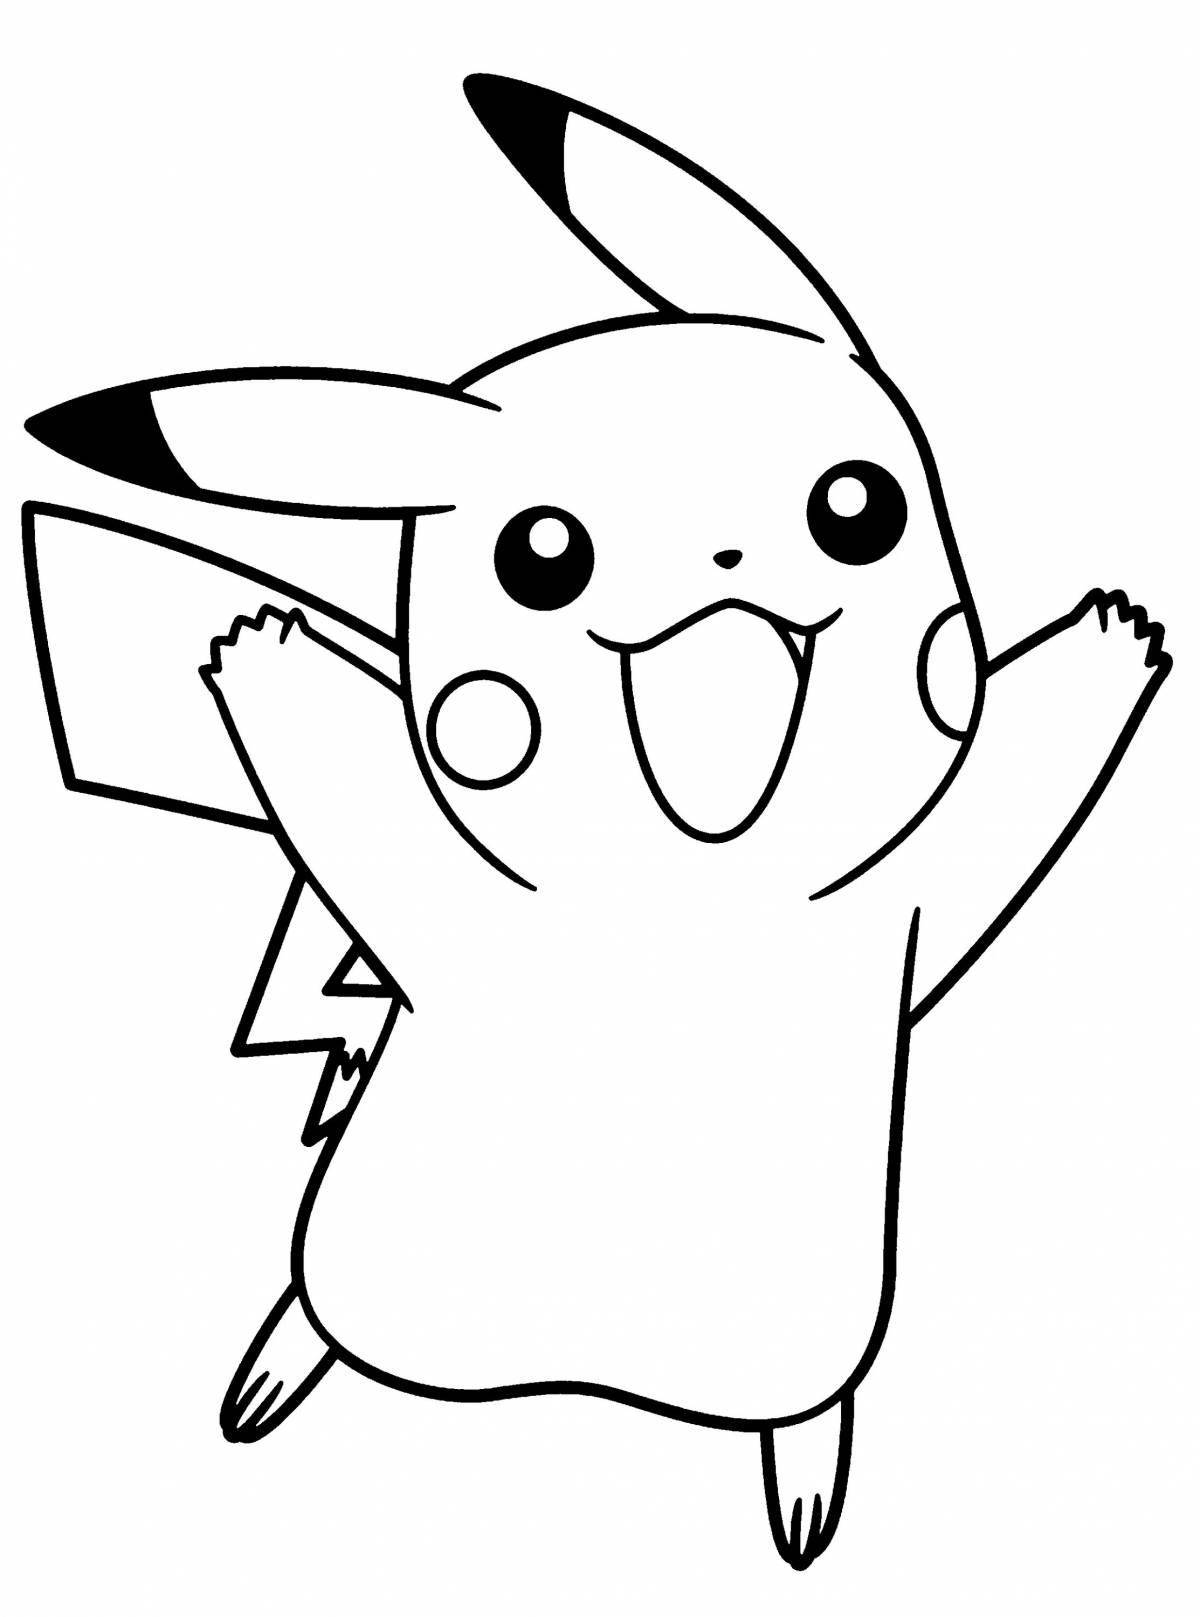 Funny pikachu coloring book